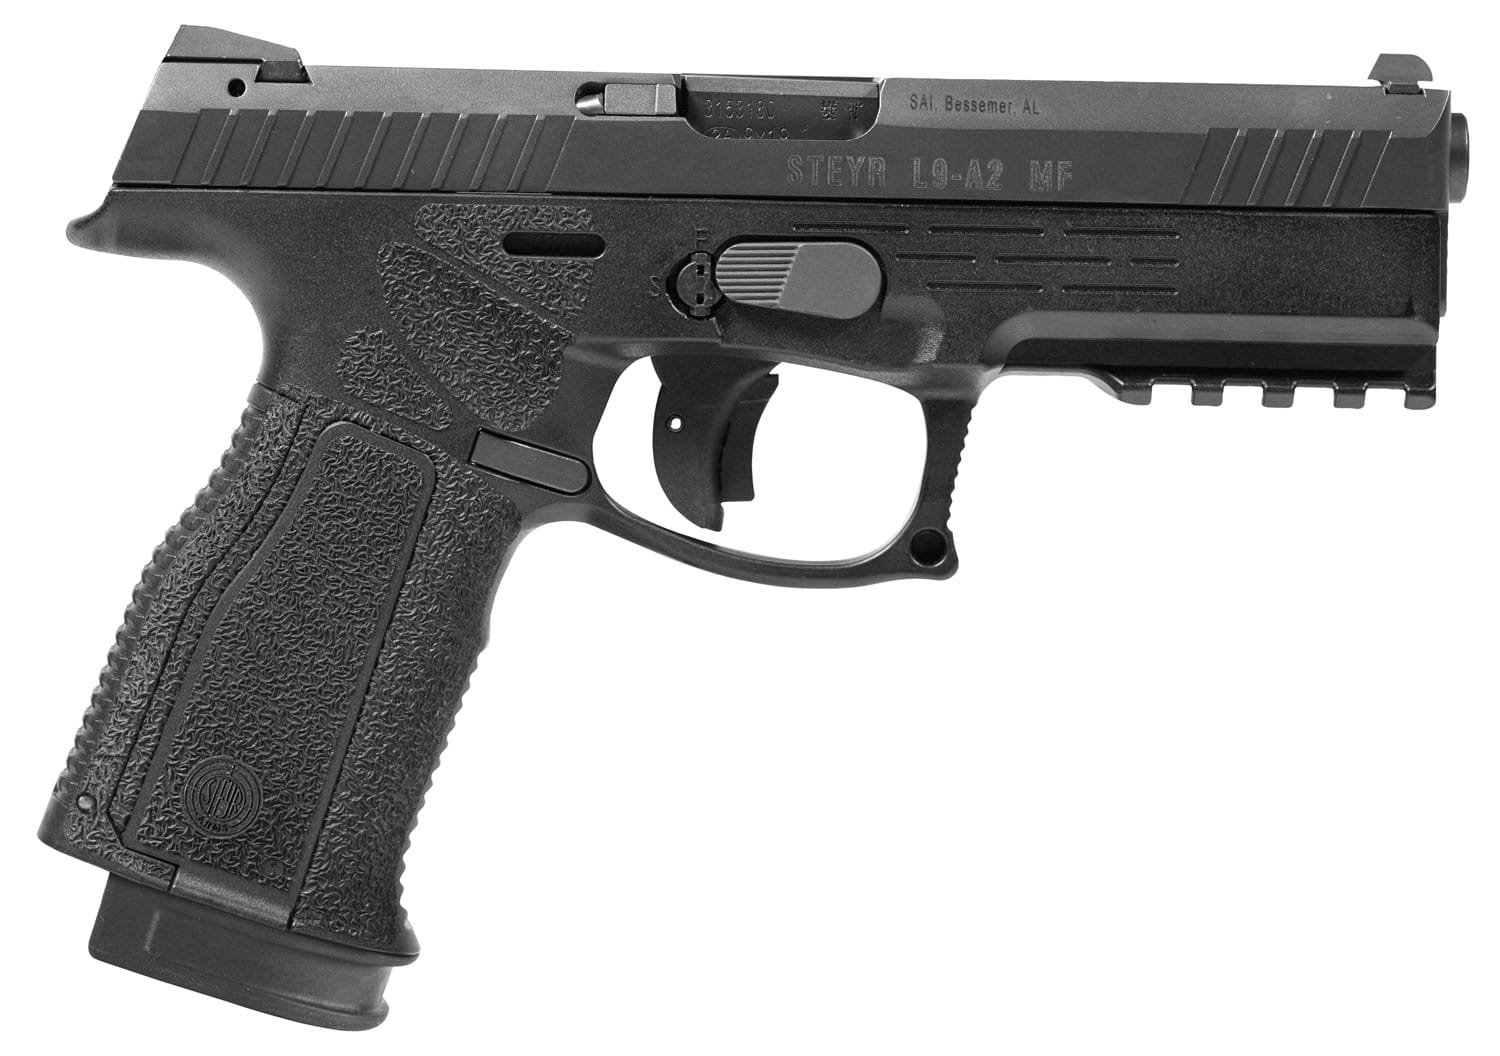 Image of STEYR L9-A2 MF